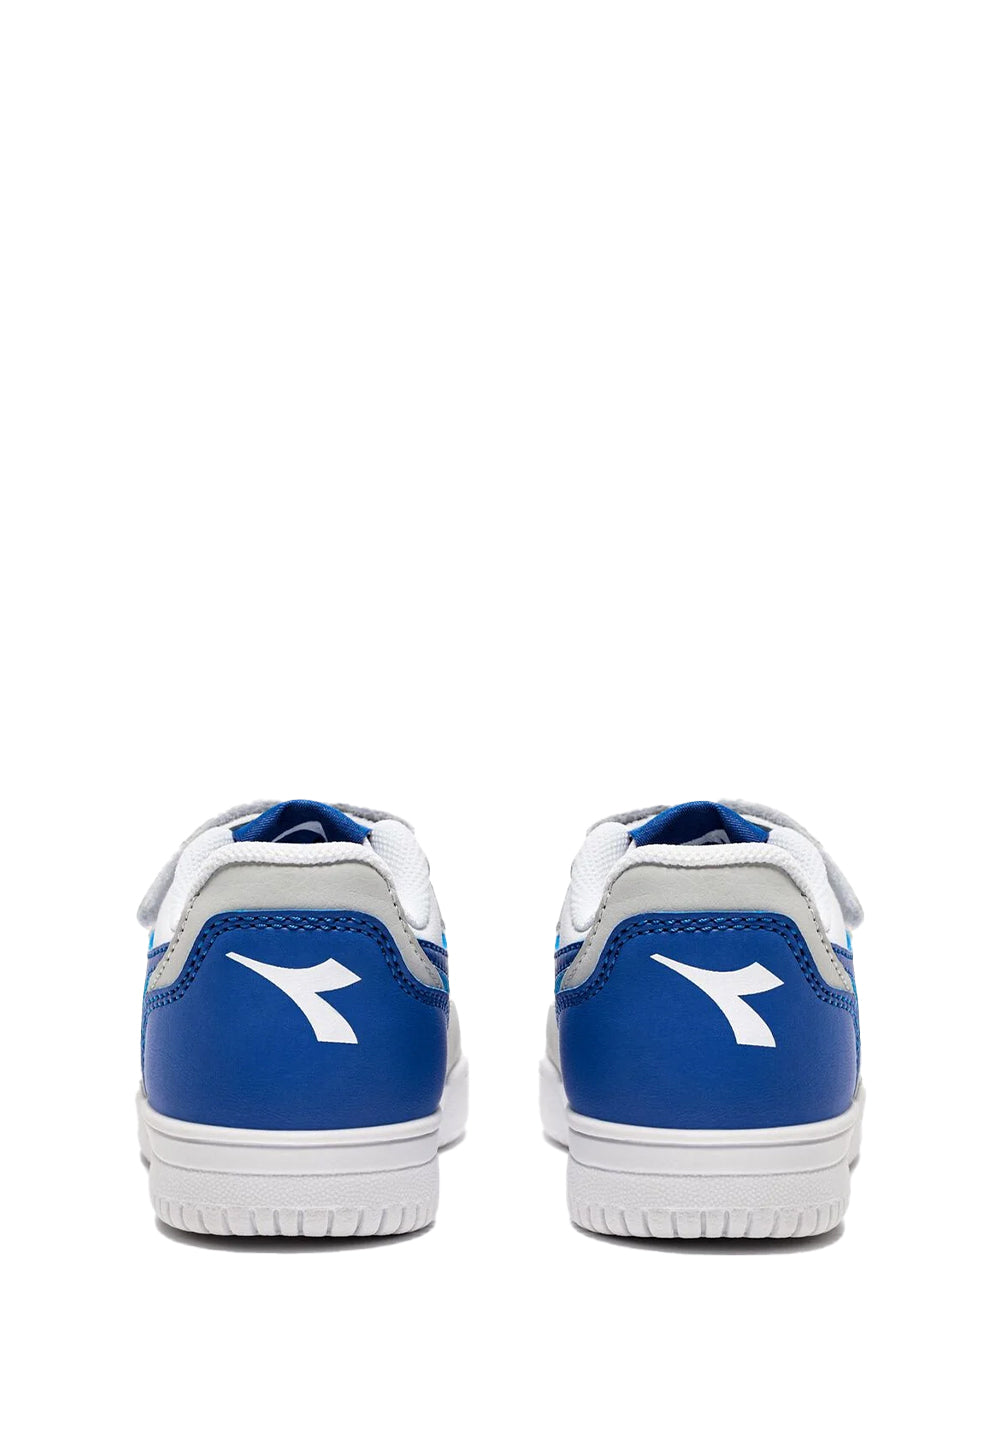 White-blue shoes for newborn